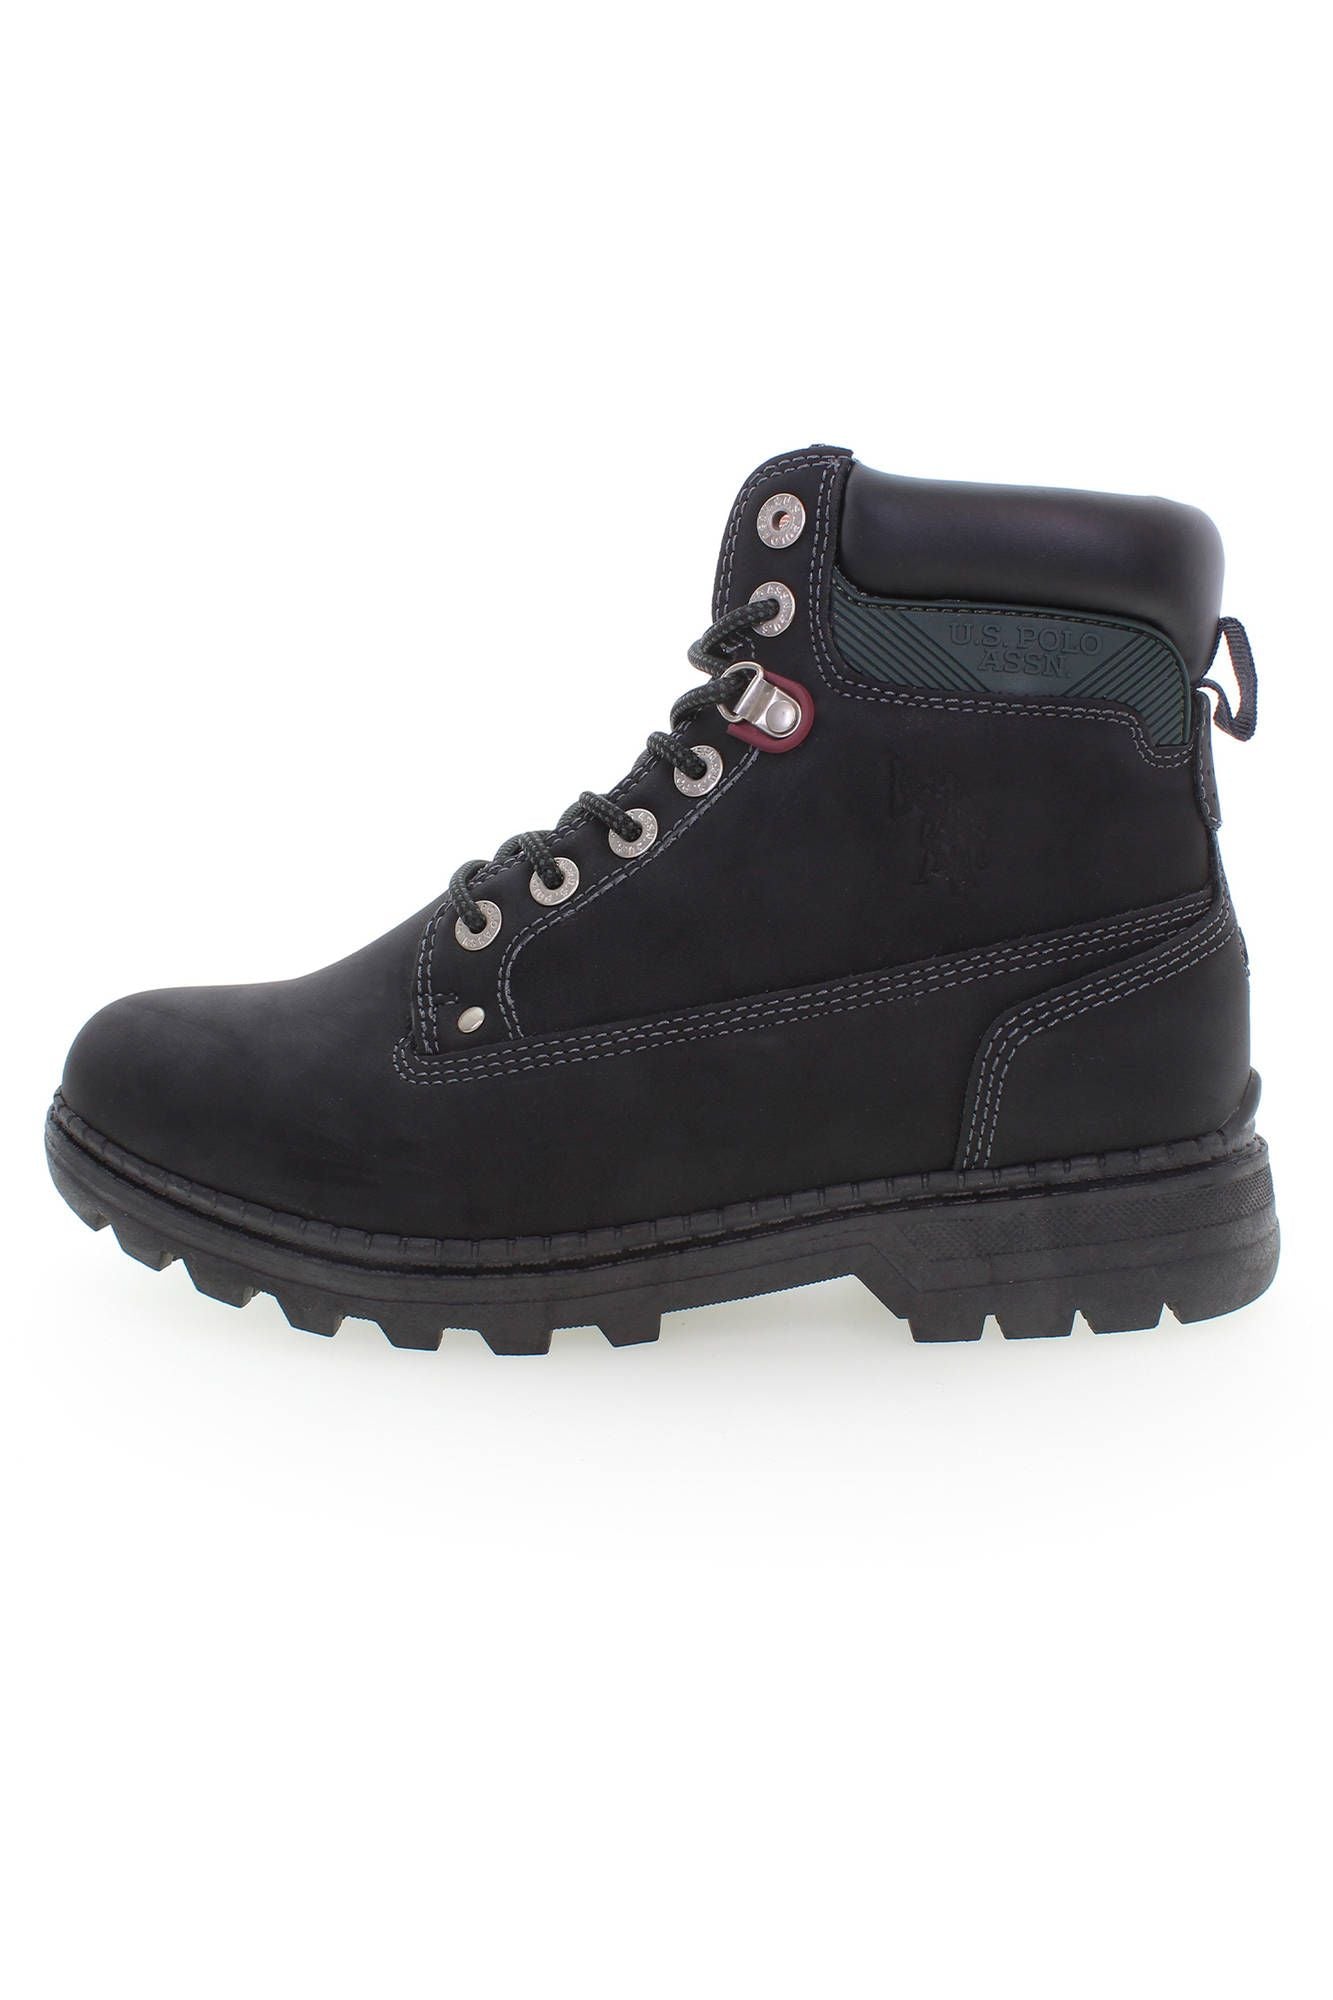 U.S. POLO ASSN. Equestrian Chic Lace-Up High Boots